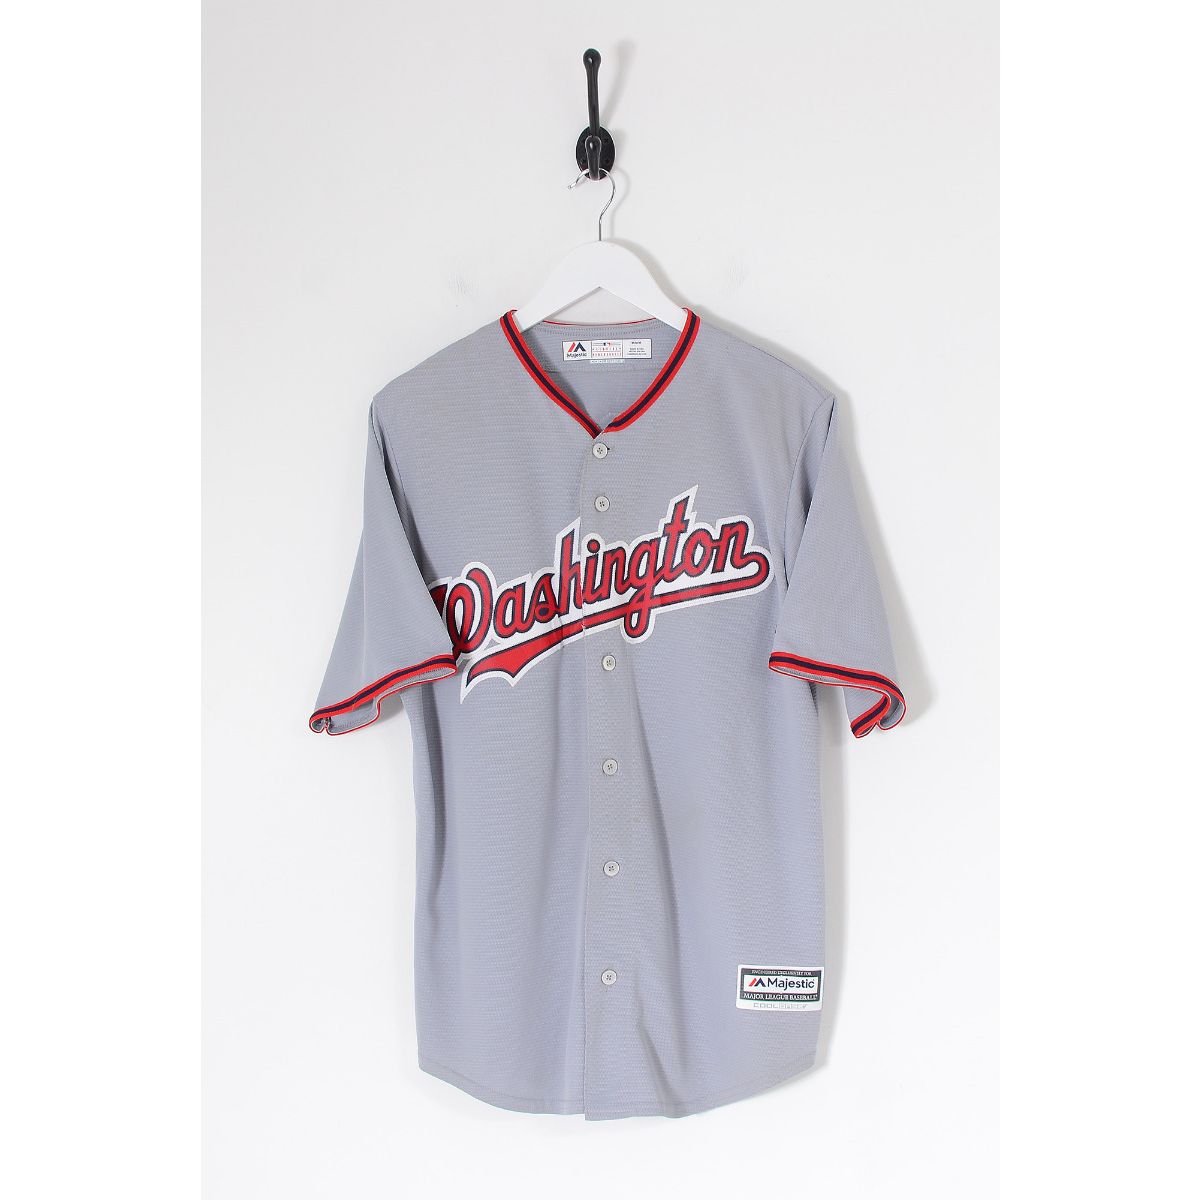 nationals jerseys today